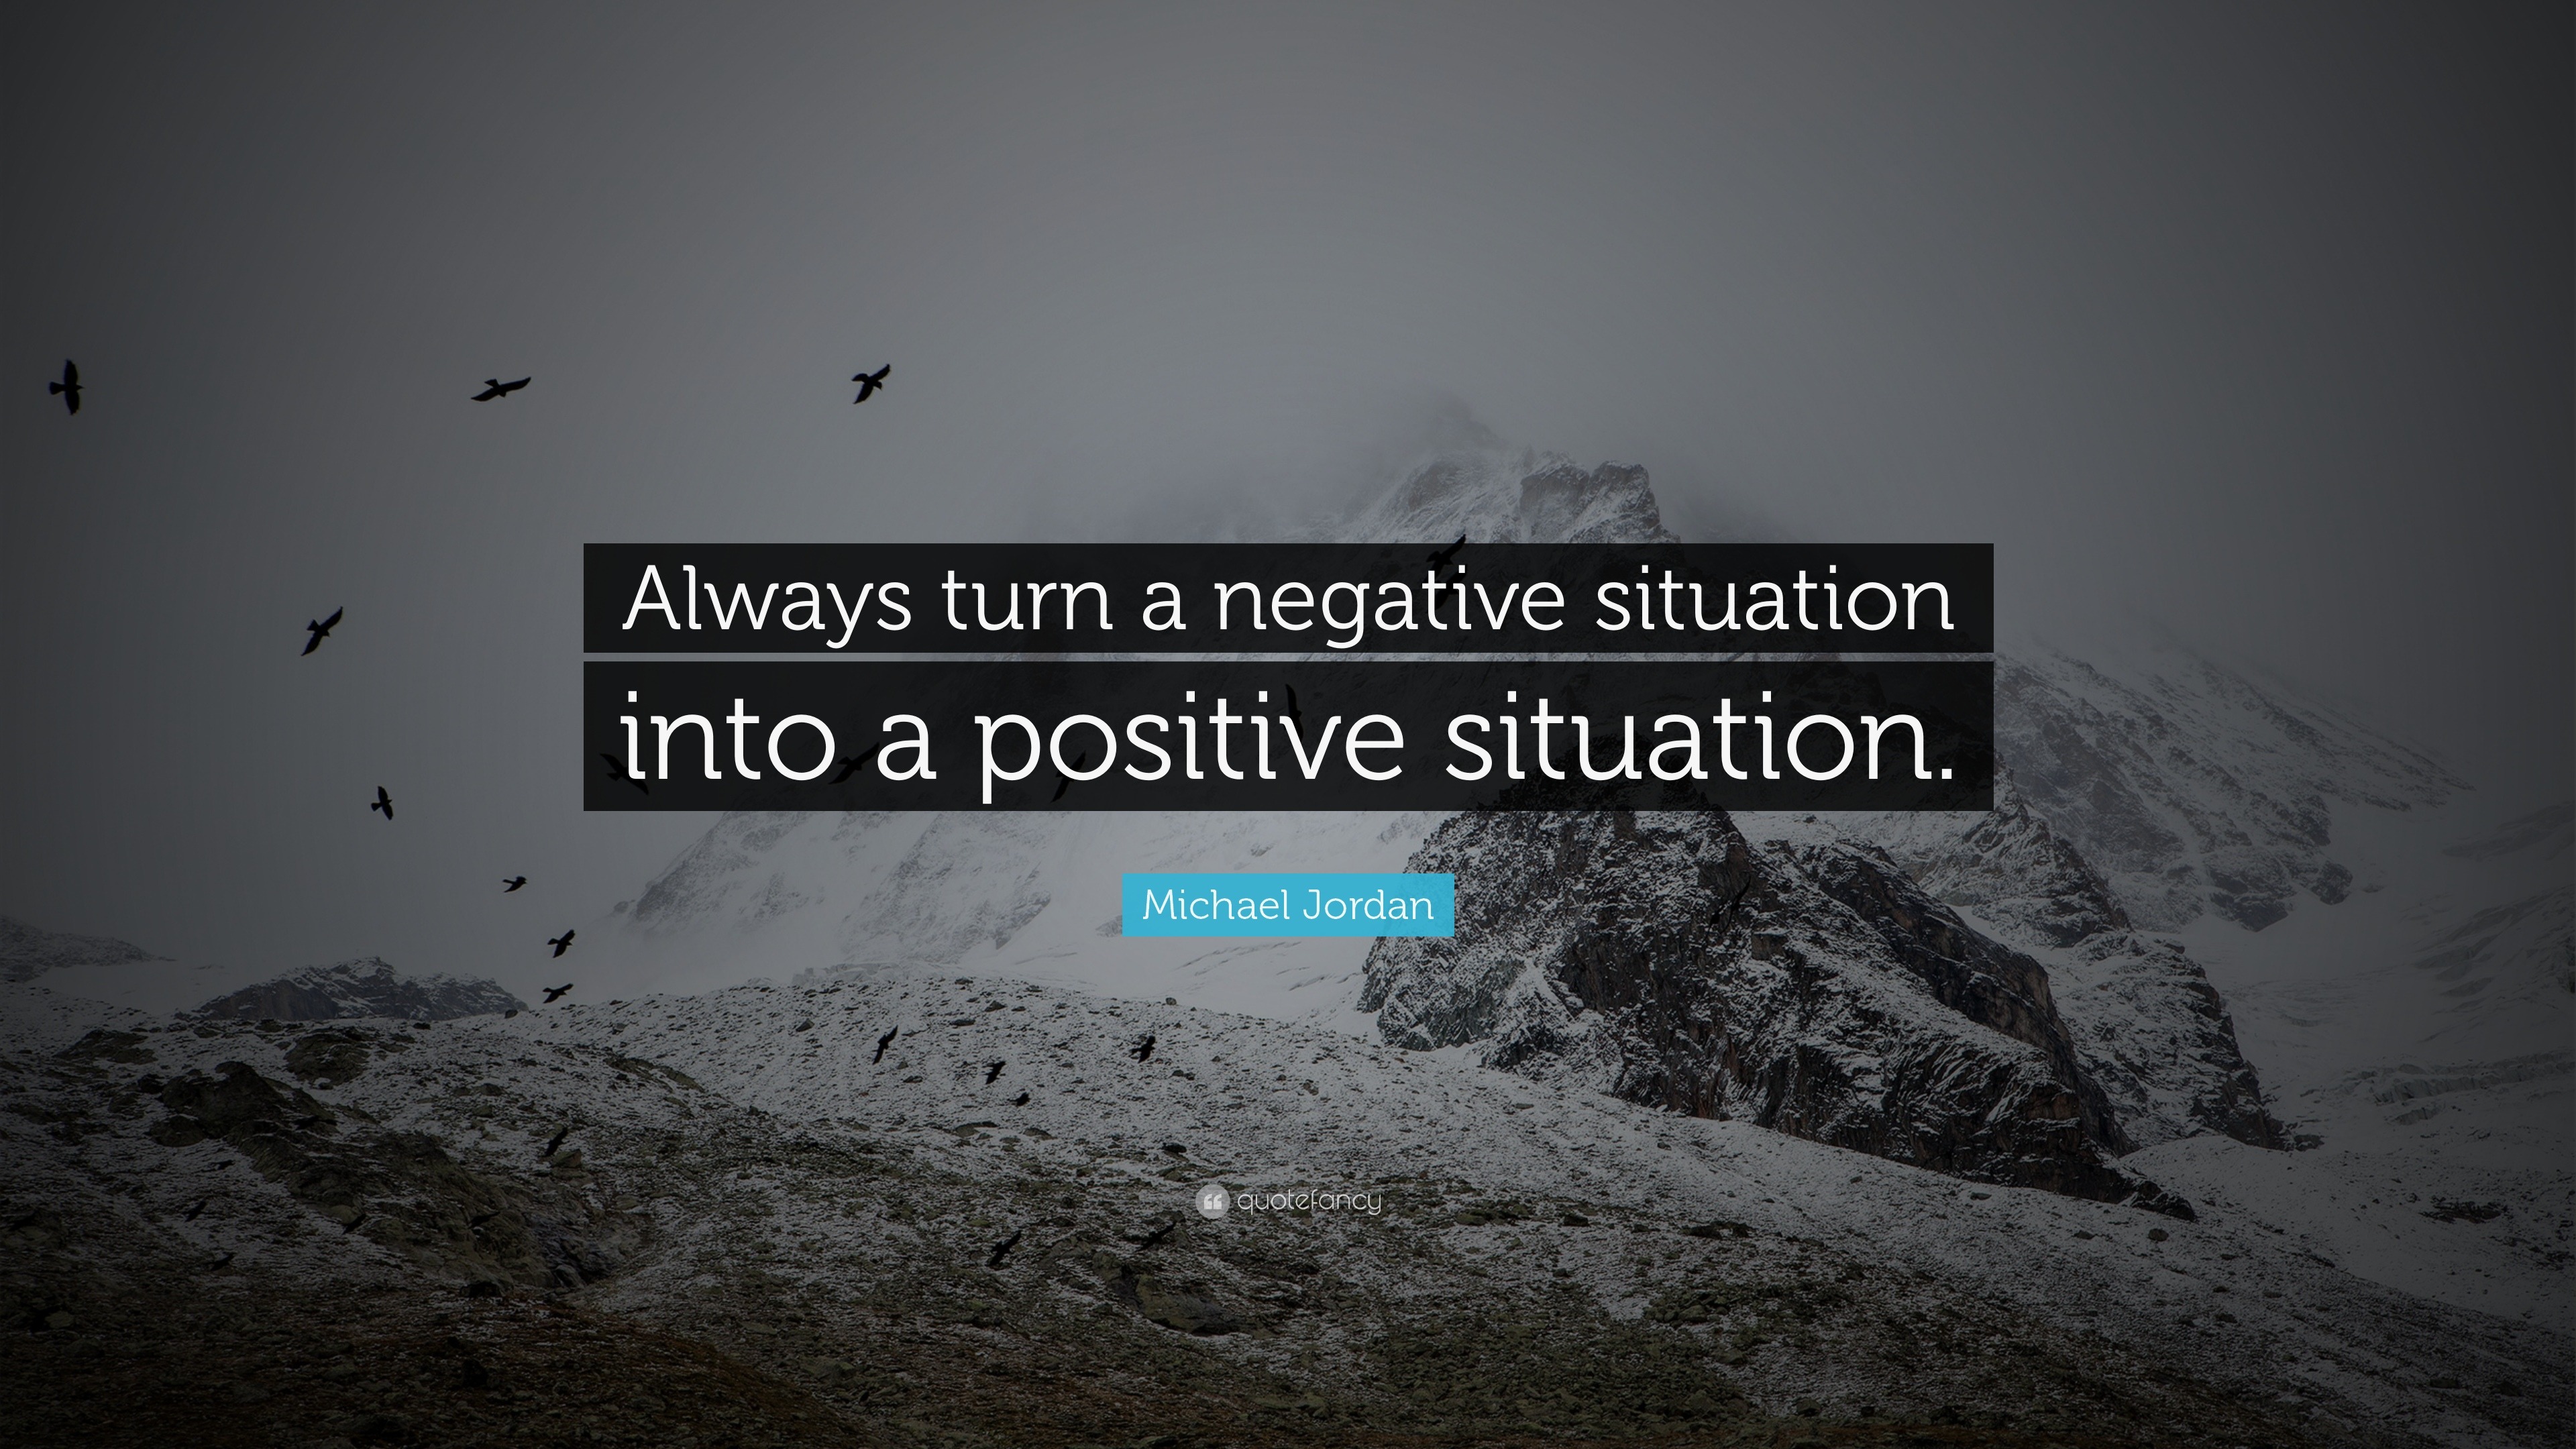 Michael Jordan Quote: “Always turn a negative situation into a positive